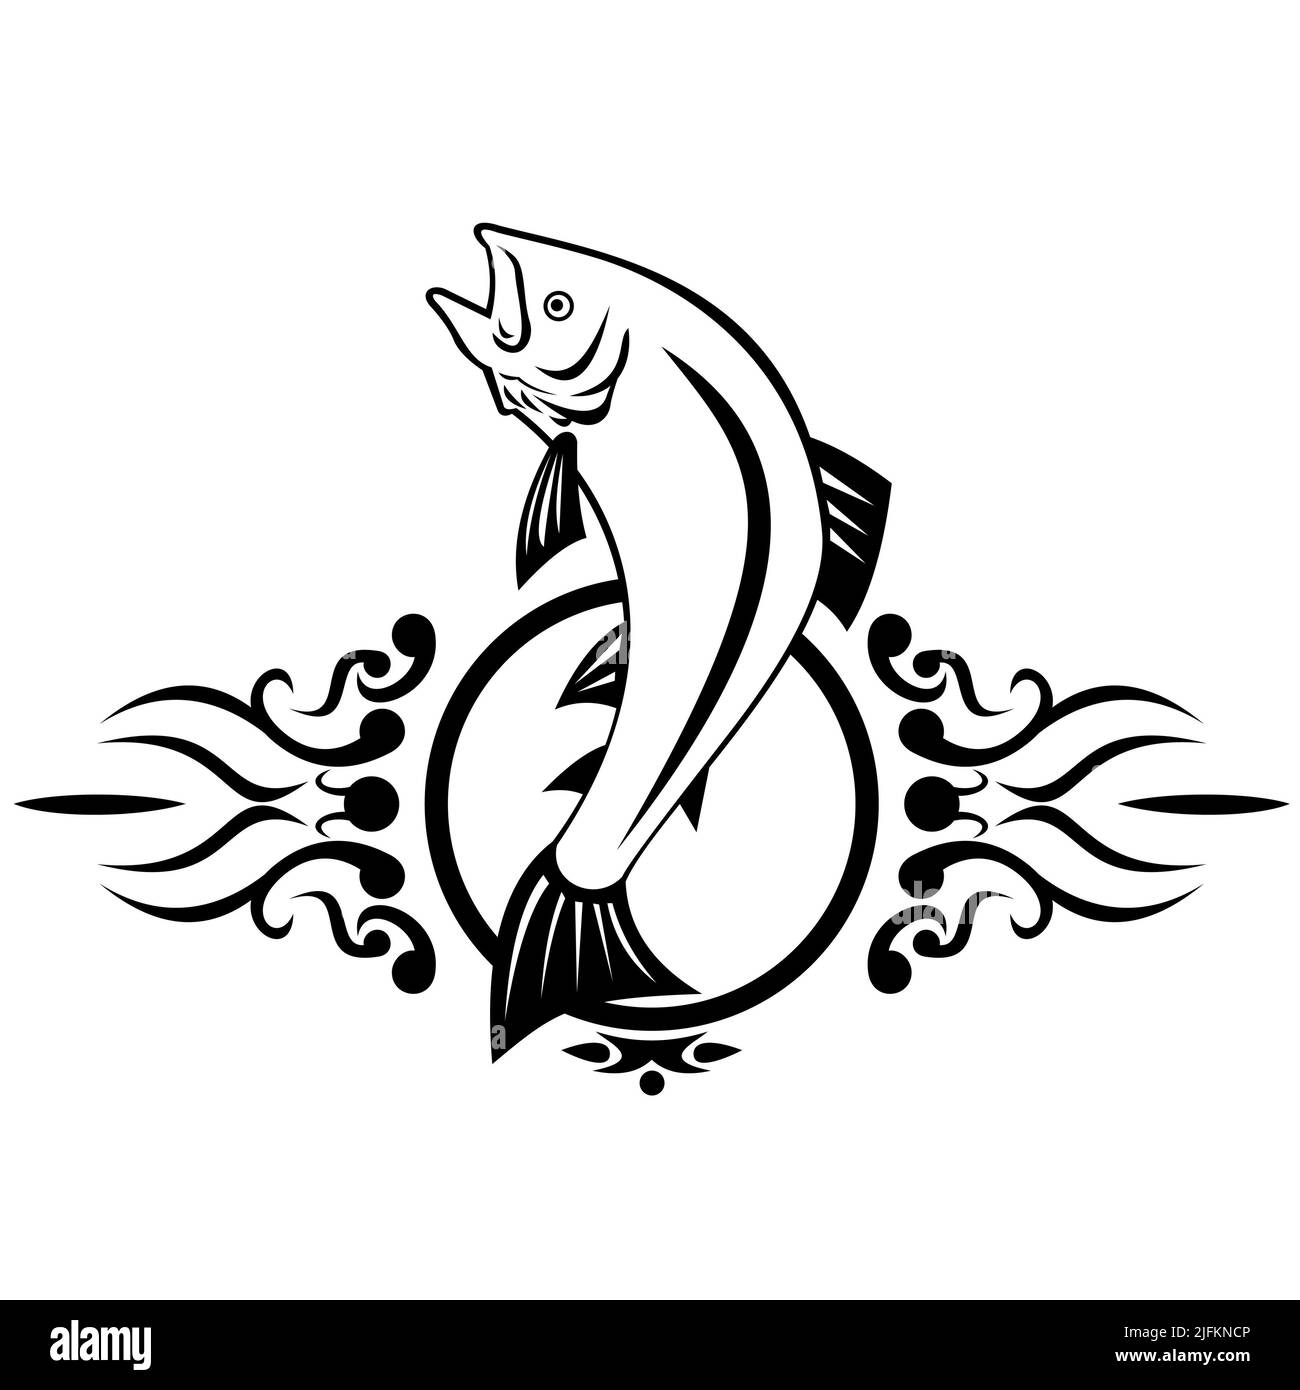 Black Fish Tattoo Illustration Fish Drawing Fish Sketch Fish Clipart PNG  Transparent Clipart Image and PSD File for Free Download